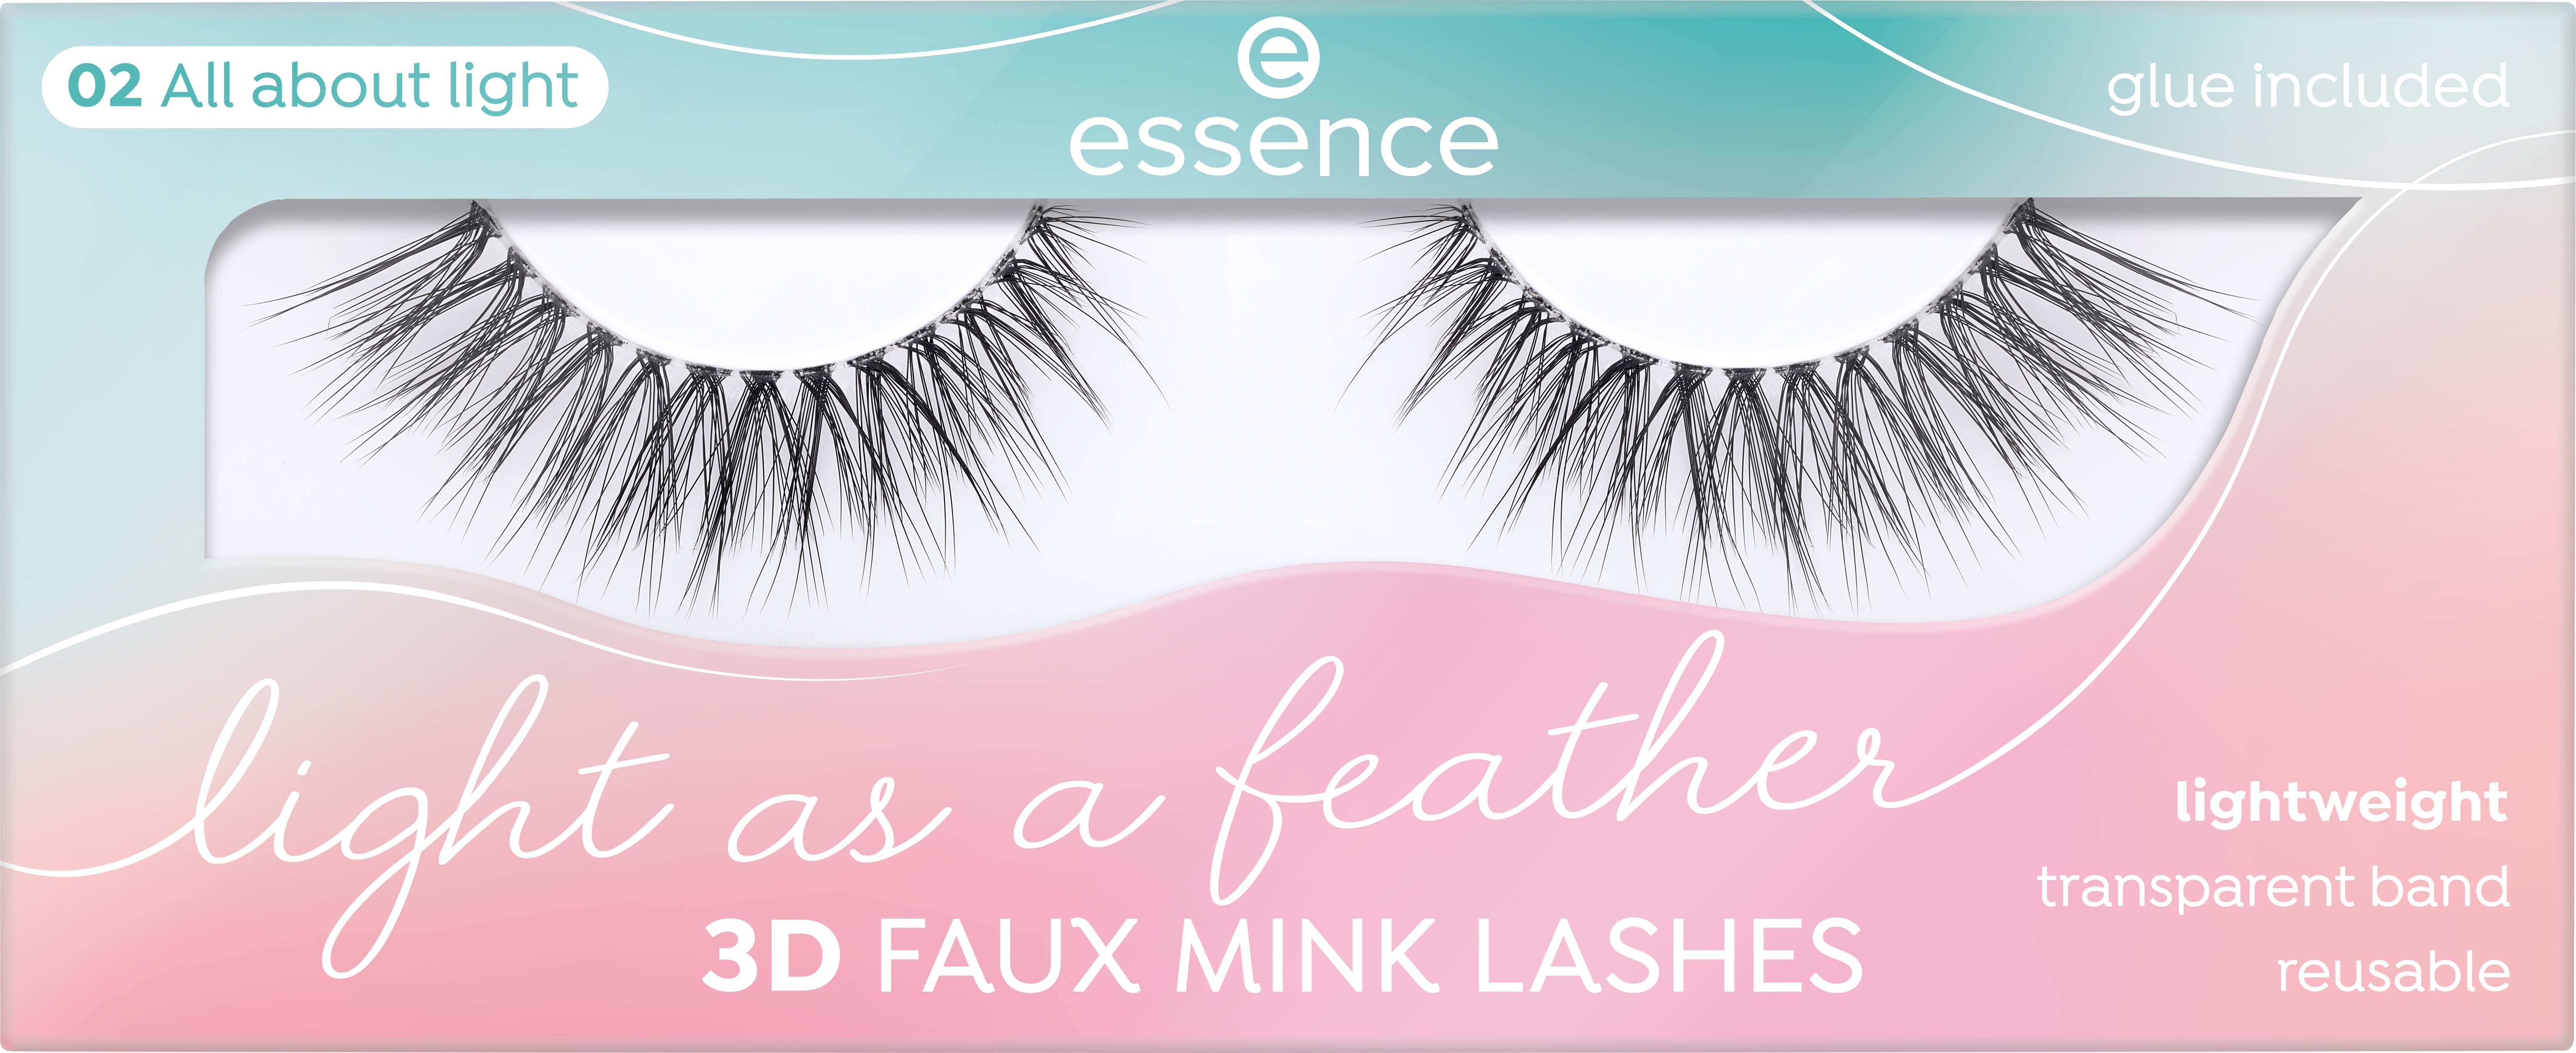 essence Light As A Feather 3D Faux Mink Lashes 02 All about light